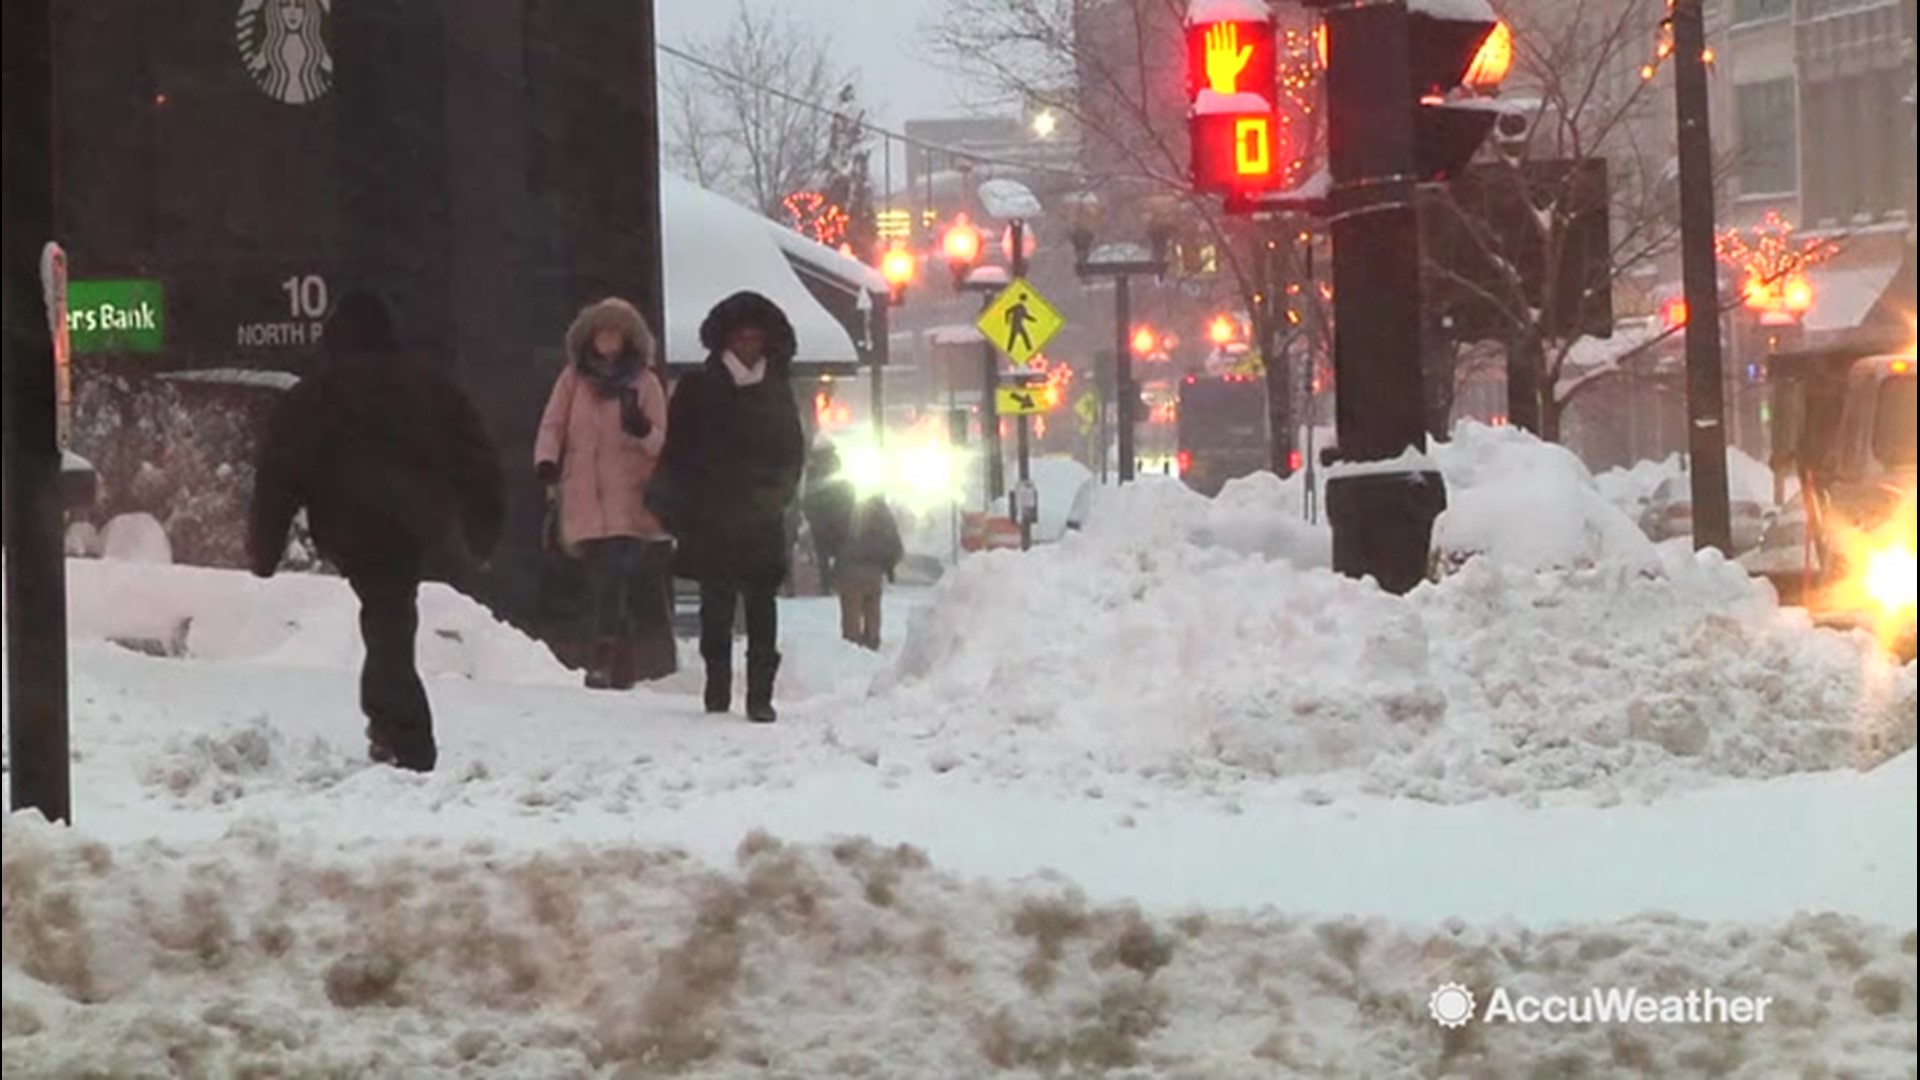 The first significant storm has hit upstate New York, with more than a foot of snow expected in some parts of that area. Residents are ready, and according to them, the city of Albany seems prepared also.